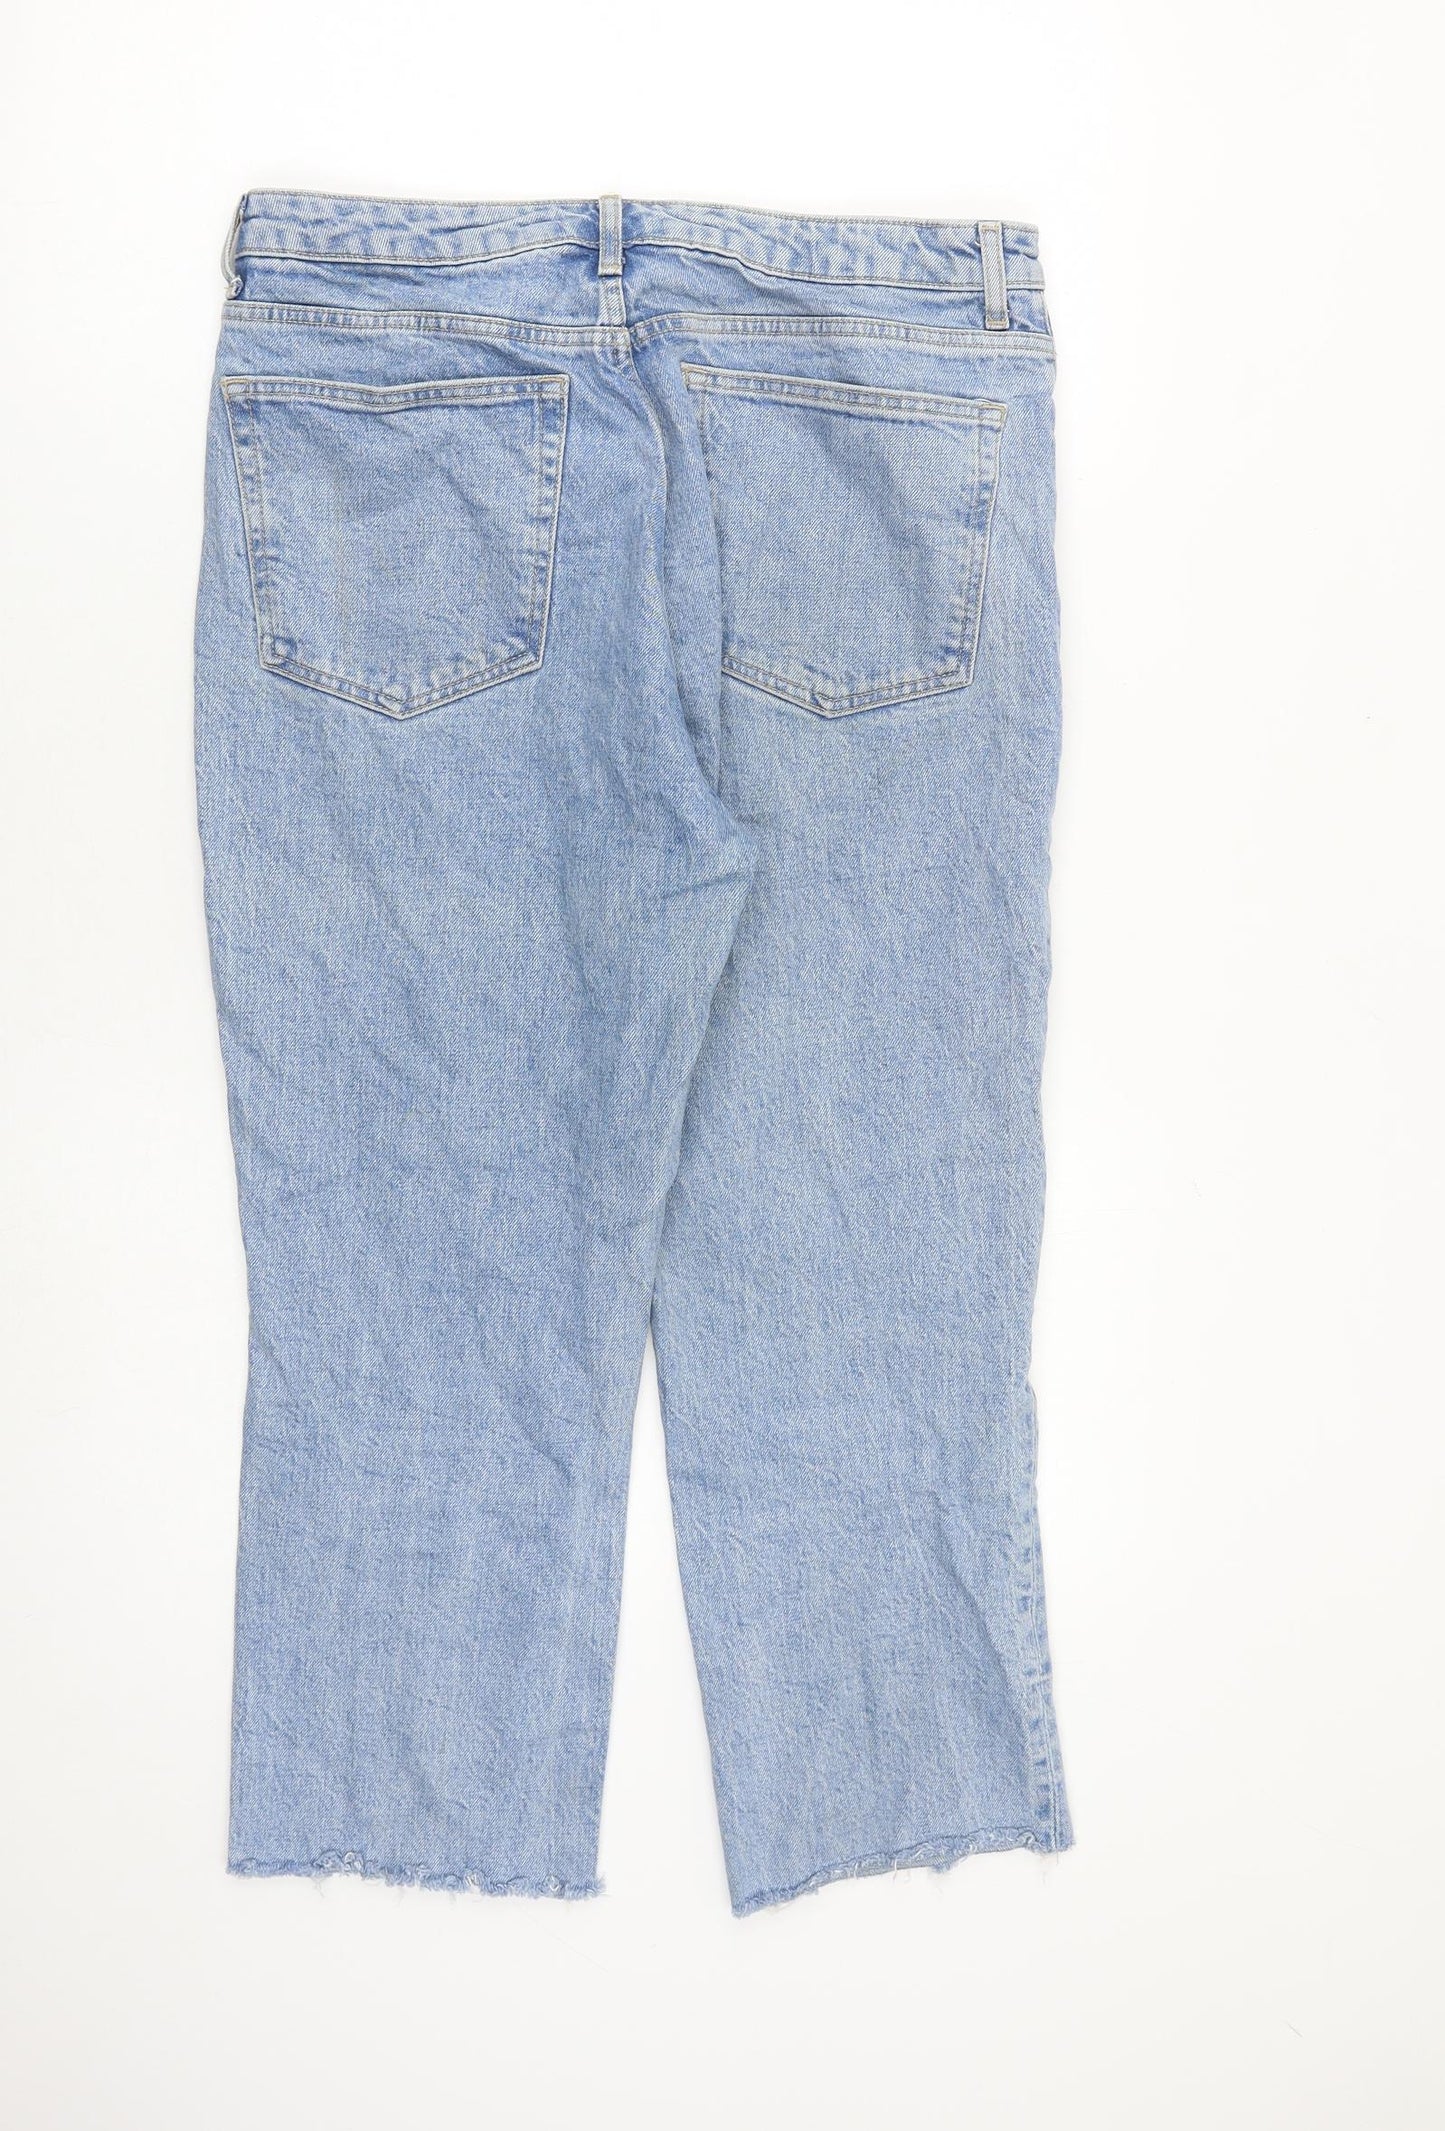 Topshop Womens Blue Cotton Cropped Jeans Size 32 in L24 in Regular Zip - Raw Hem